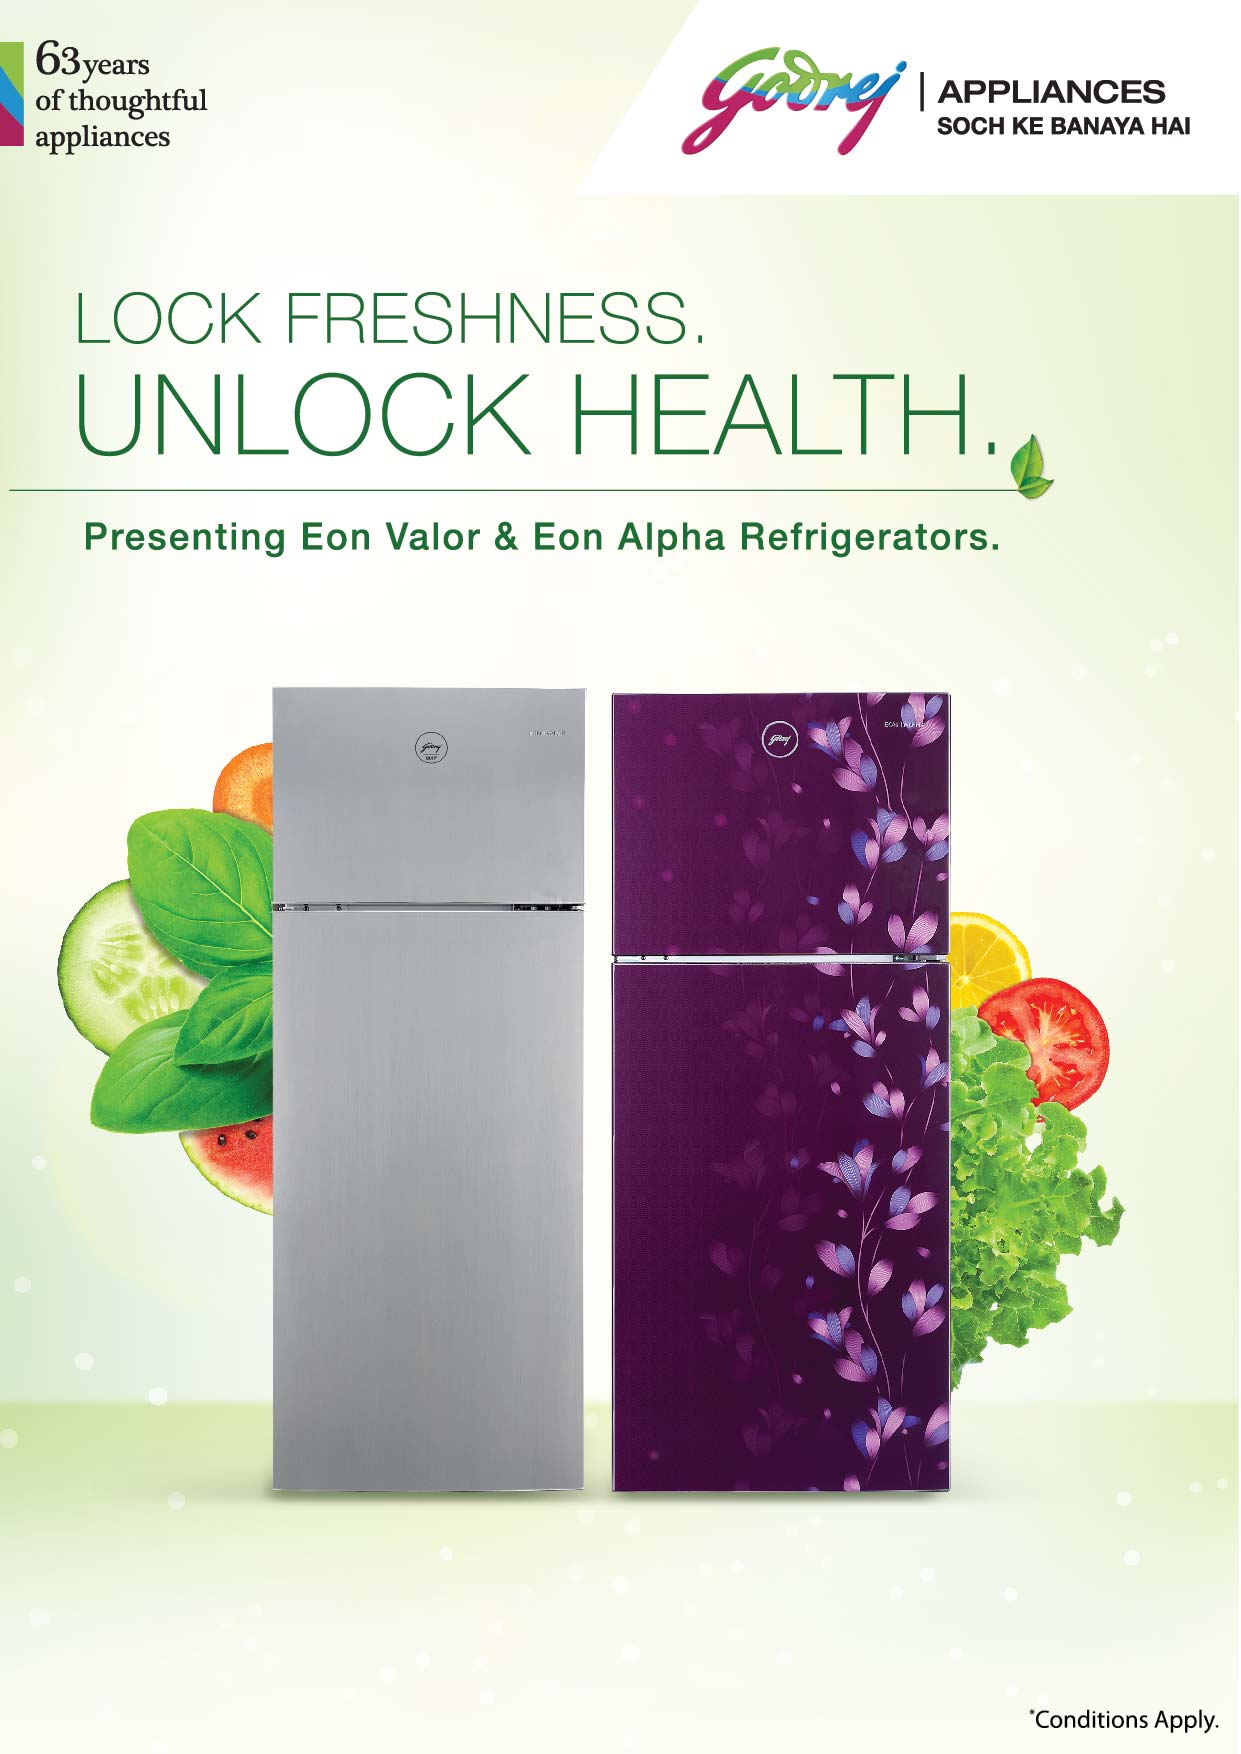 godrej-appliances-keeps-your-perishables-fresh-for-up-to-30-days-with-new-cool-balance-technology-in-its-latest-refrigerators